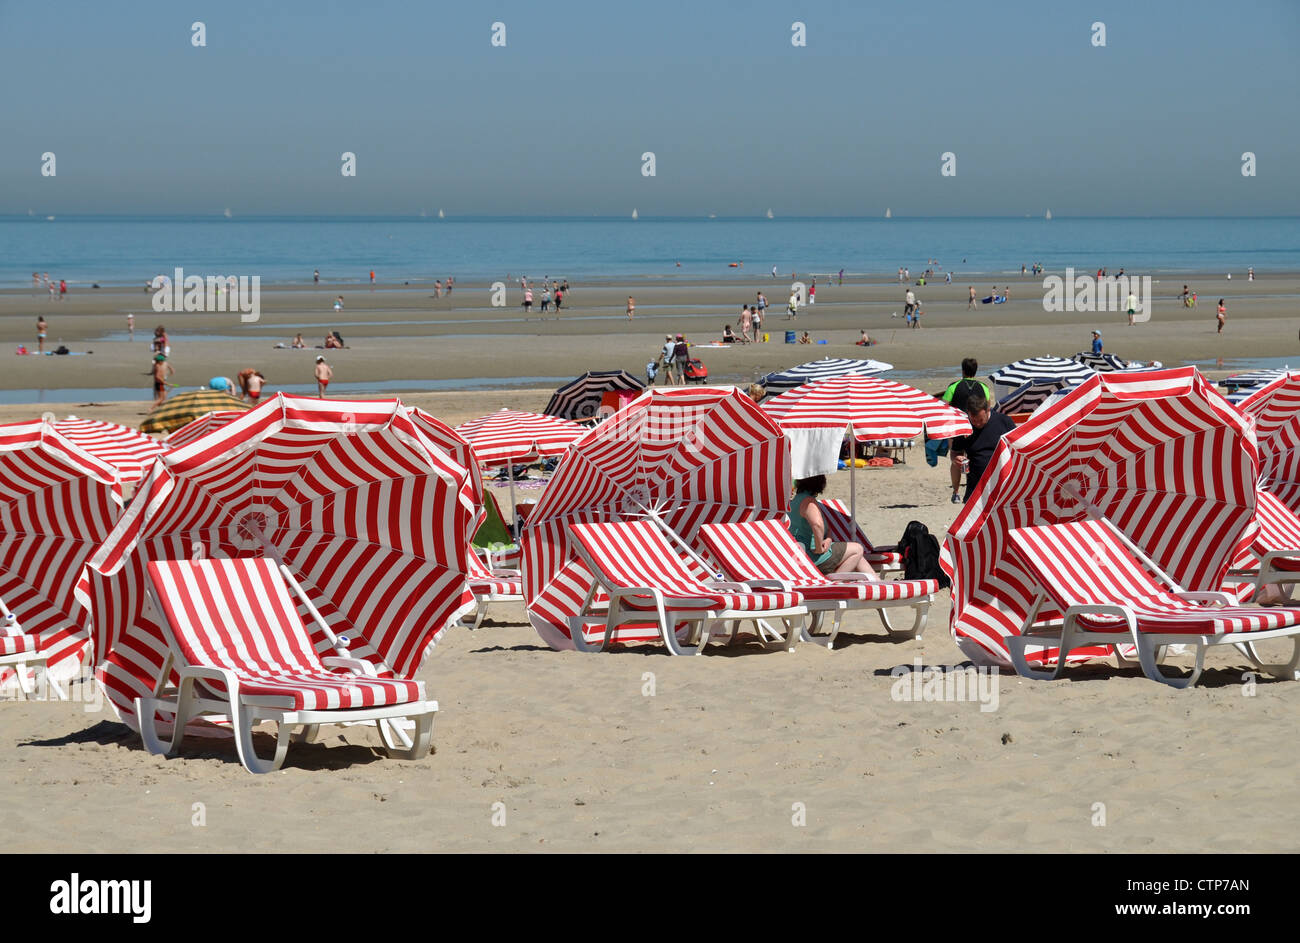 Striped parasols and deckchairs on the beach of De Panne, Belgium Stock Photo